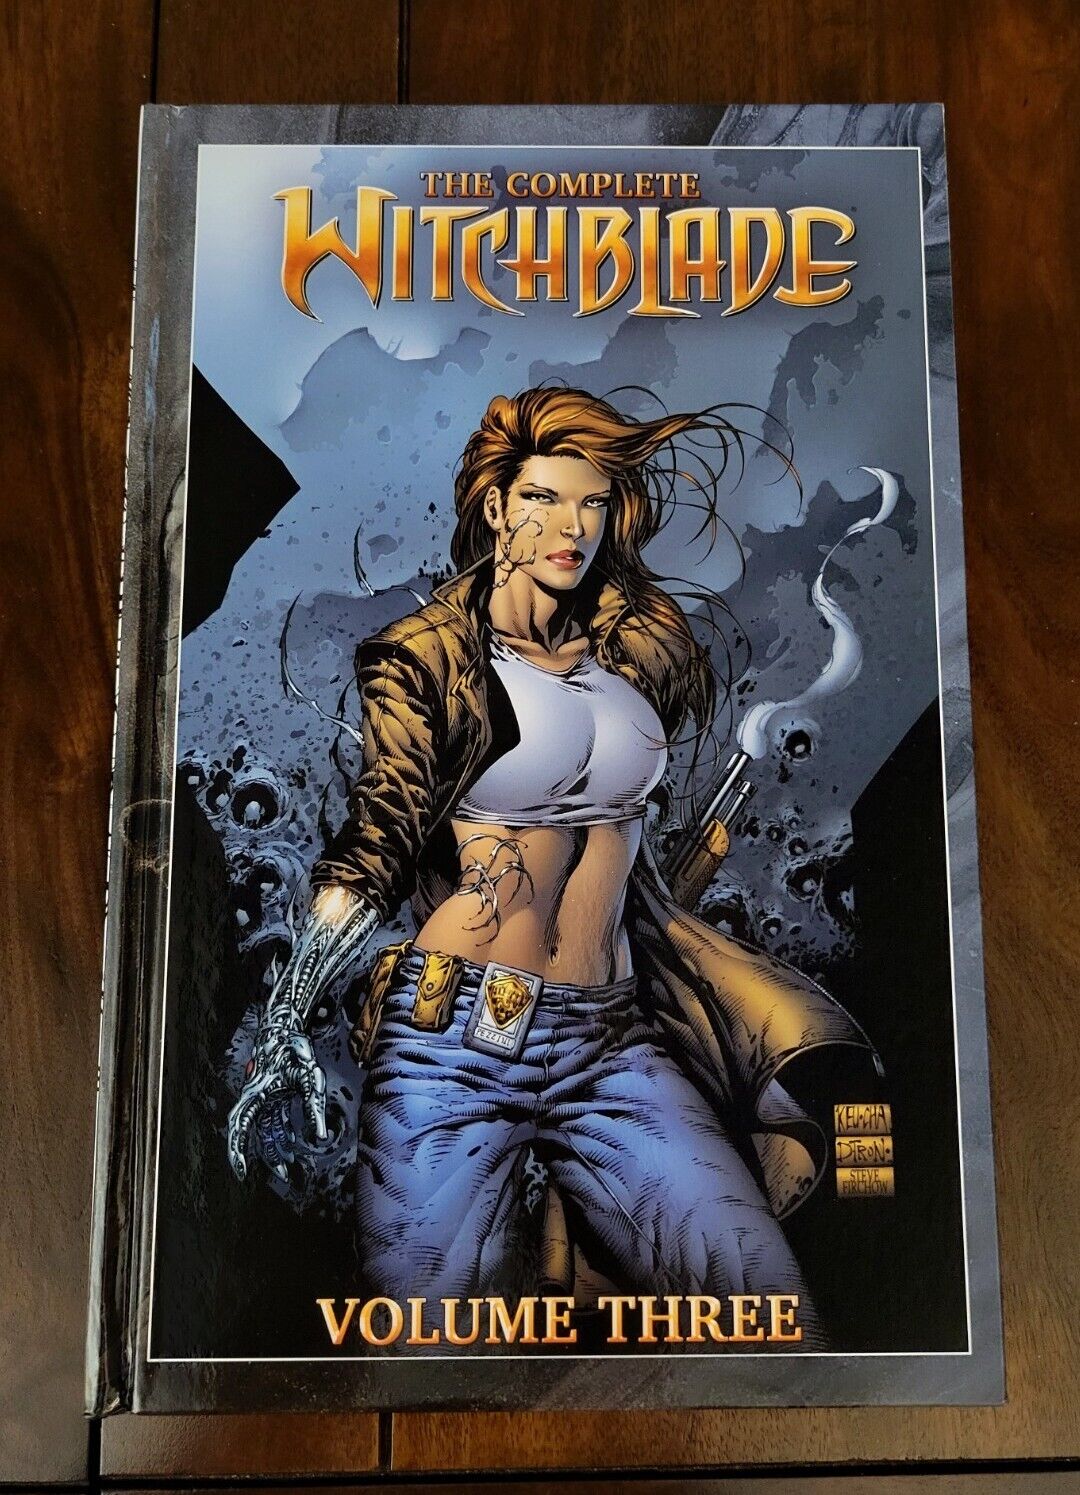 The Complete Witchblade Vol 3 Hardcover HC; Image Comics; Top Cow